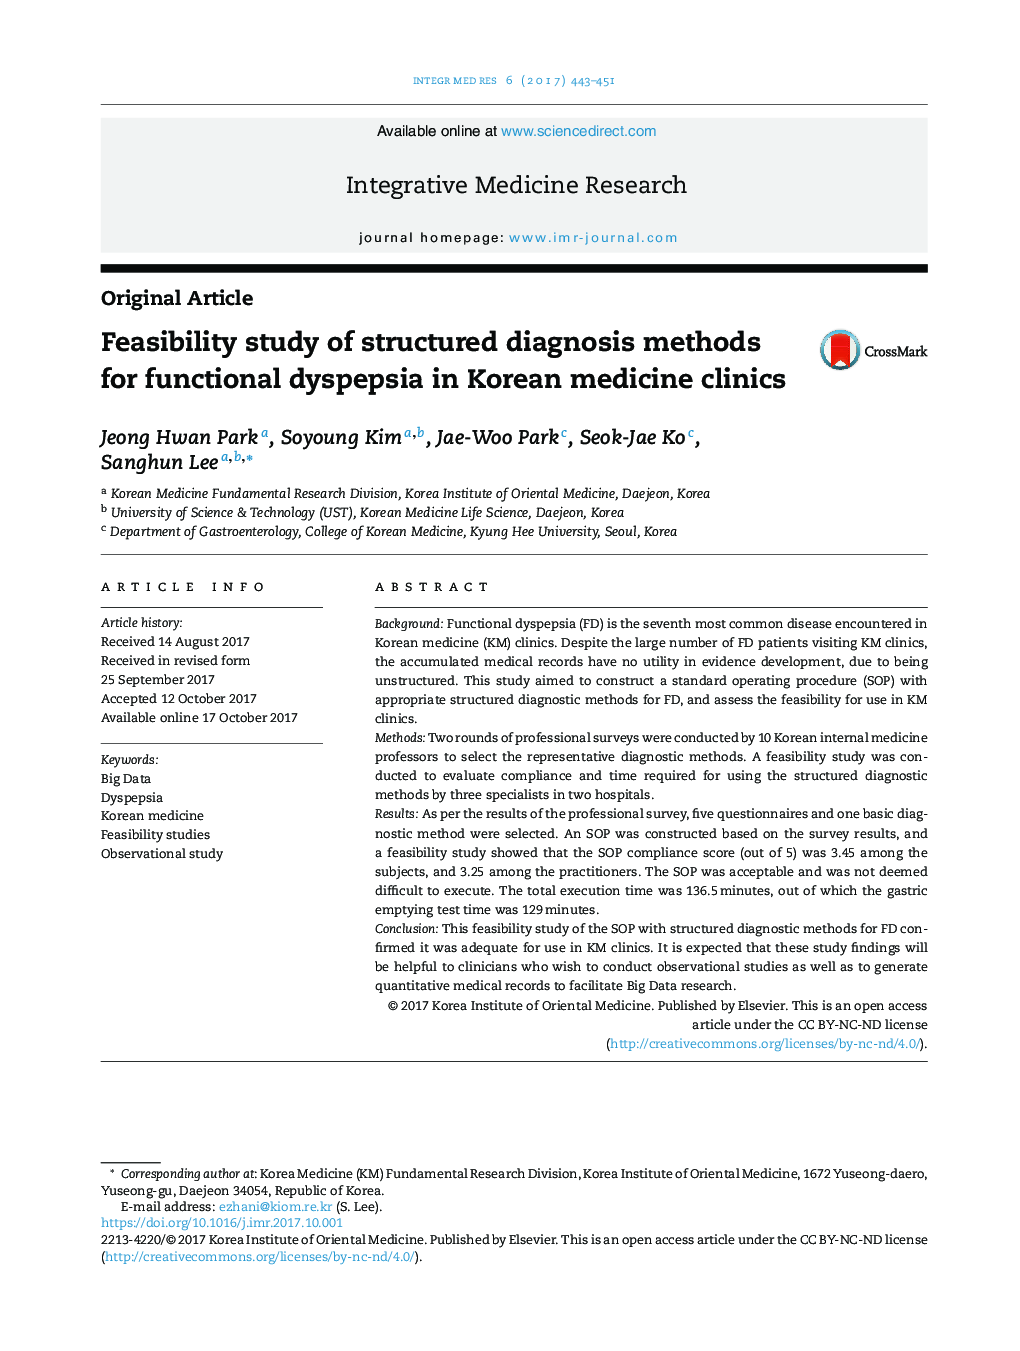 Feasibility study of structured diagnosis methods for functional dyspepsia in Korean medicine clinics